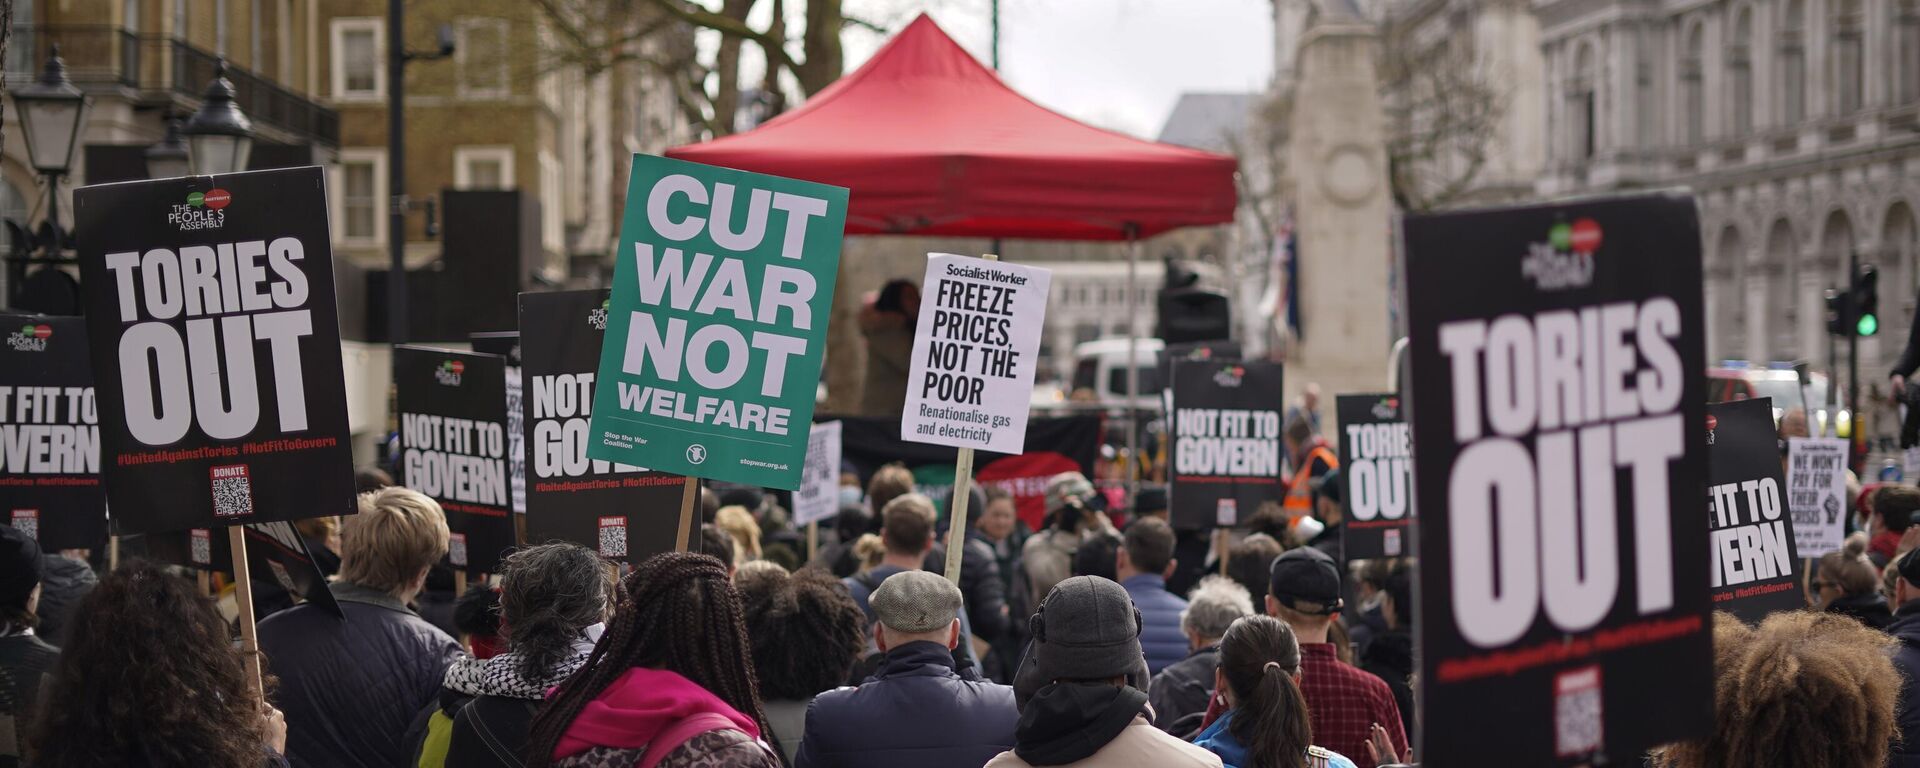 Demonstrators hold placards as they attend a protest, outside the gates of Downing Street, against the increase of the cost of living, in London, Saturday, April 2, 2022. - Sputnik International, 1920, 20.06.2022